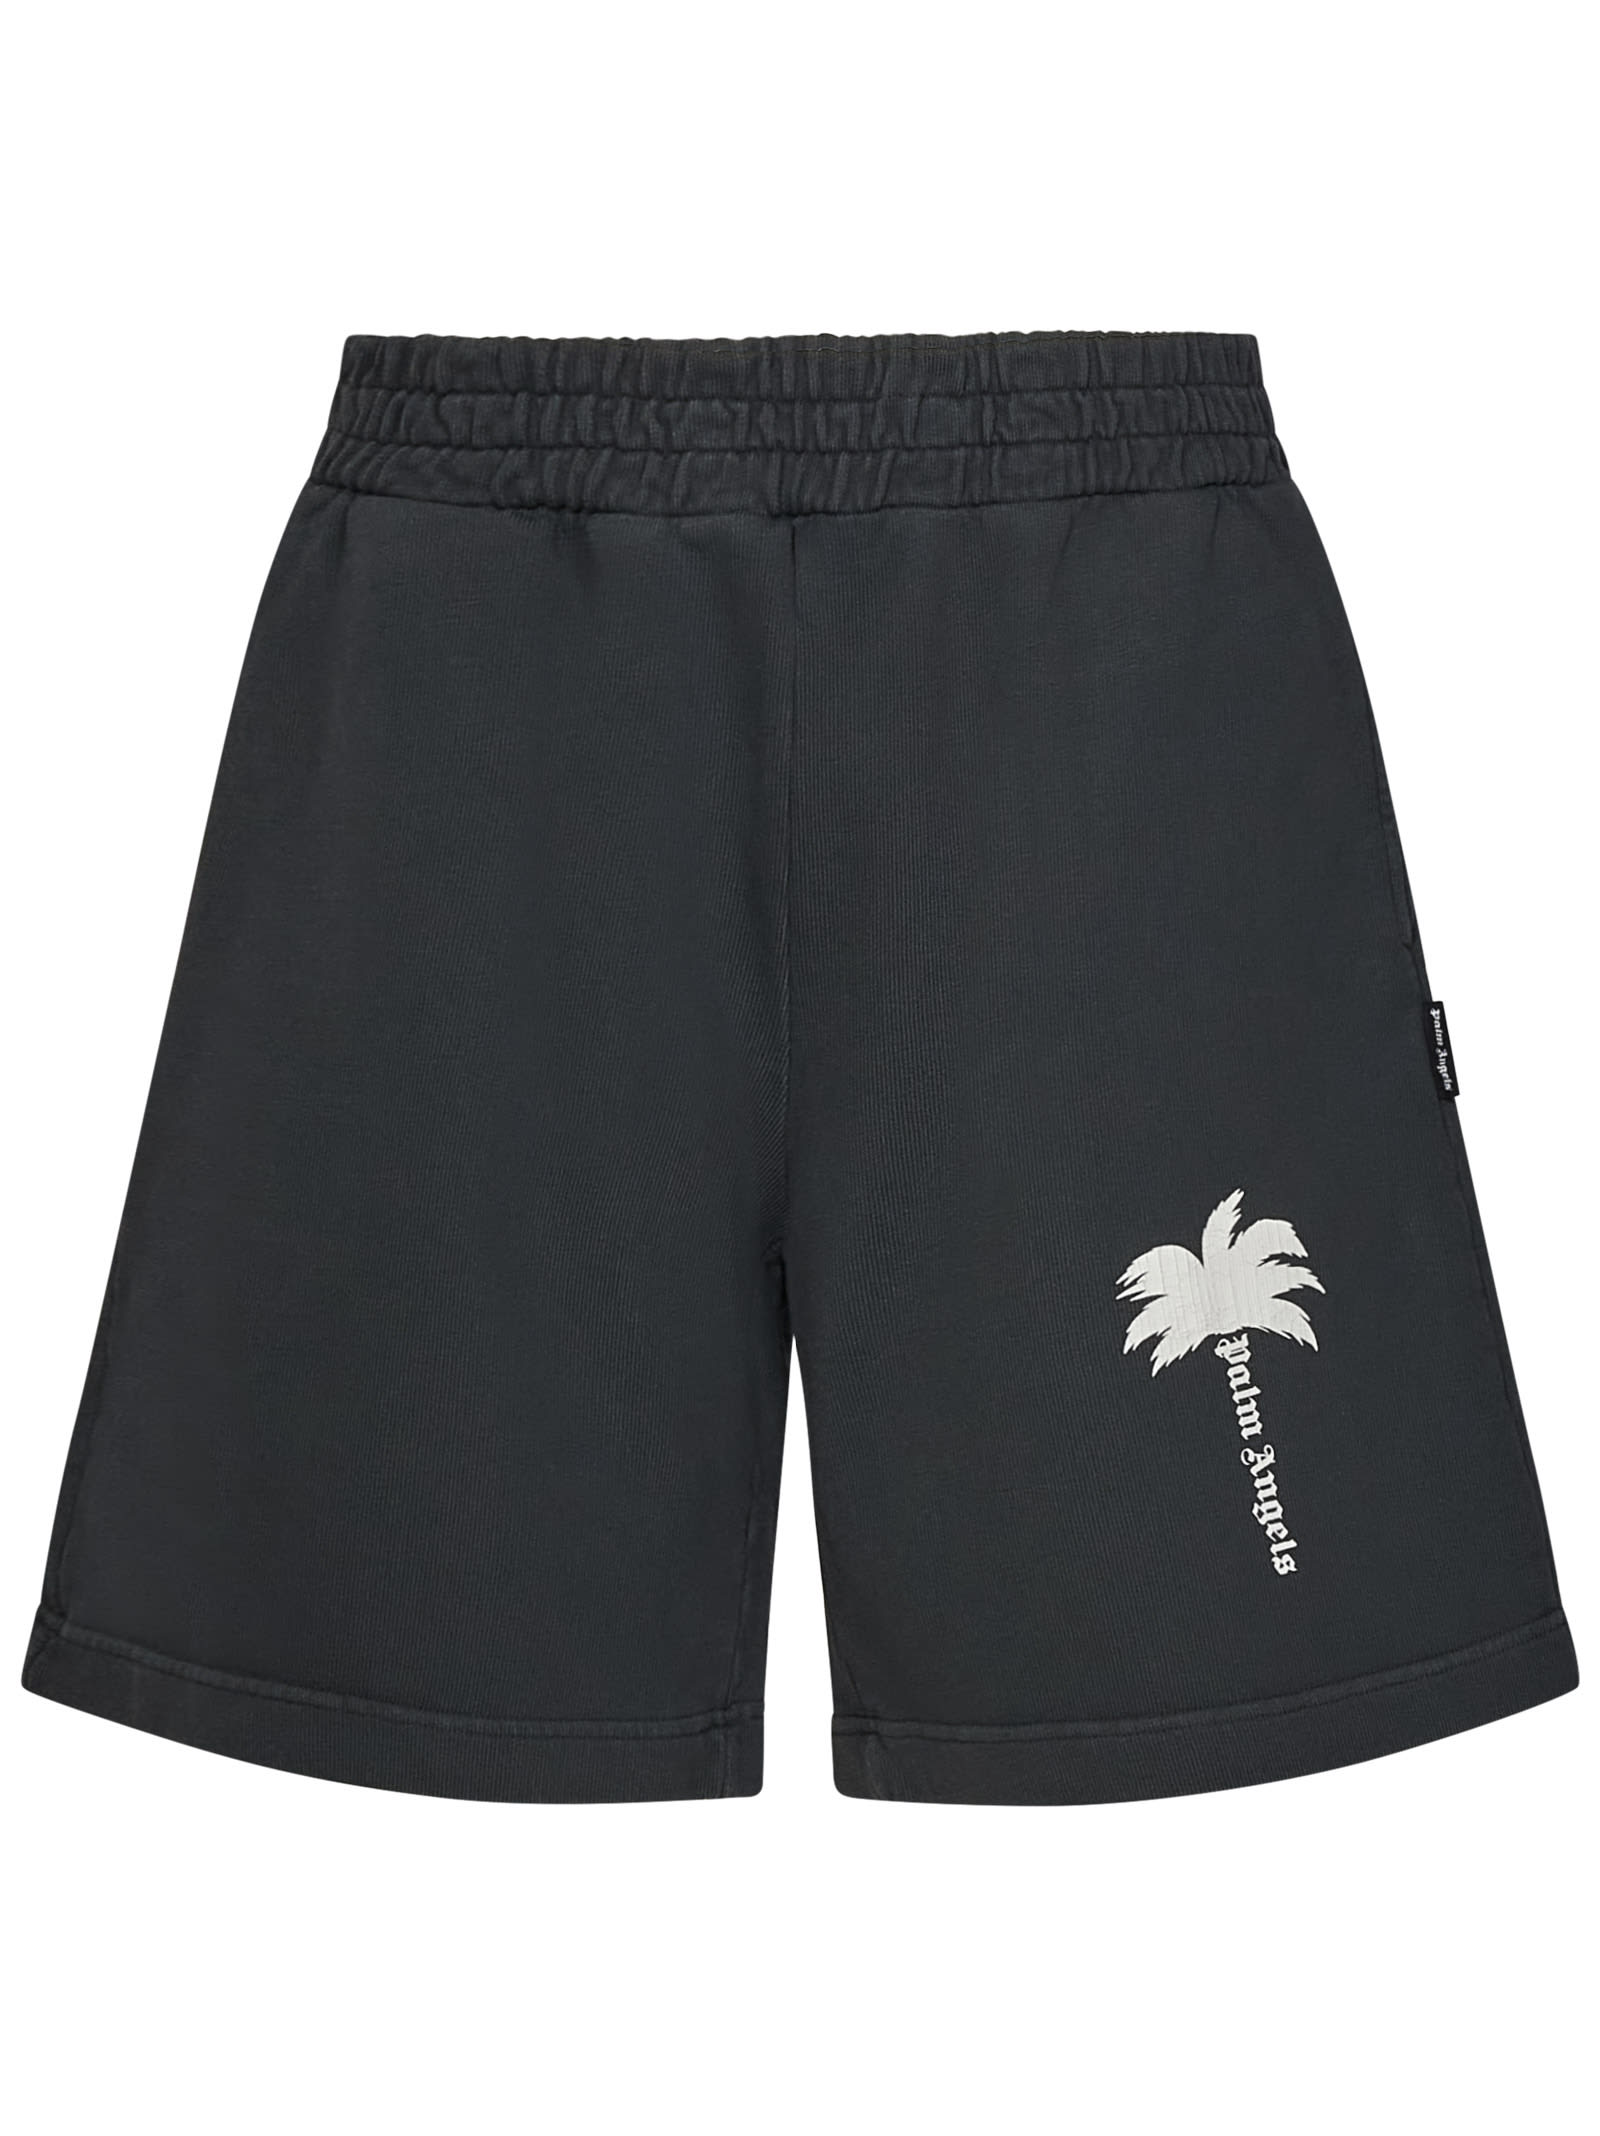 The Palm Gd Shorts